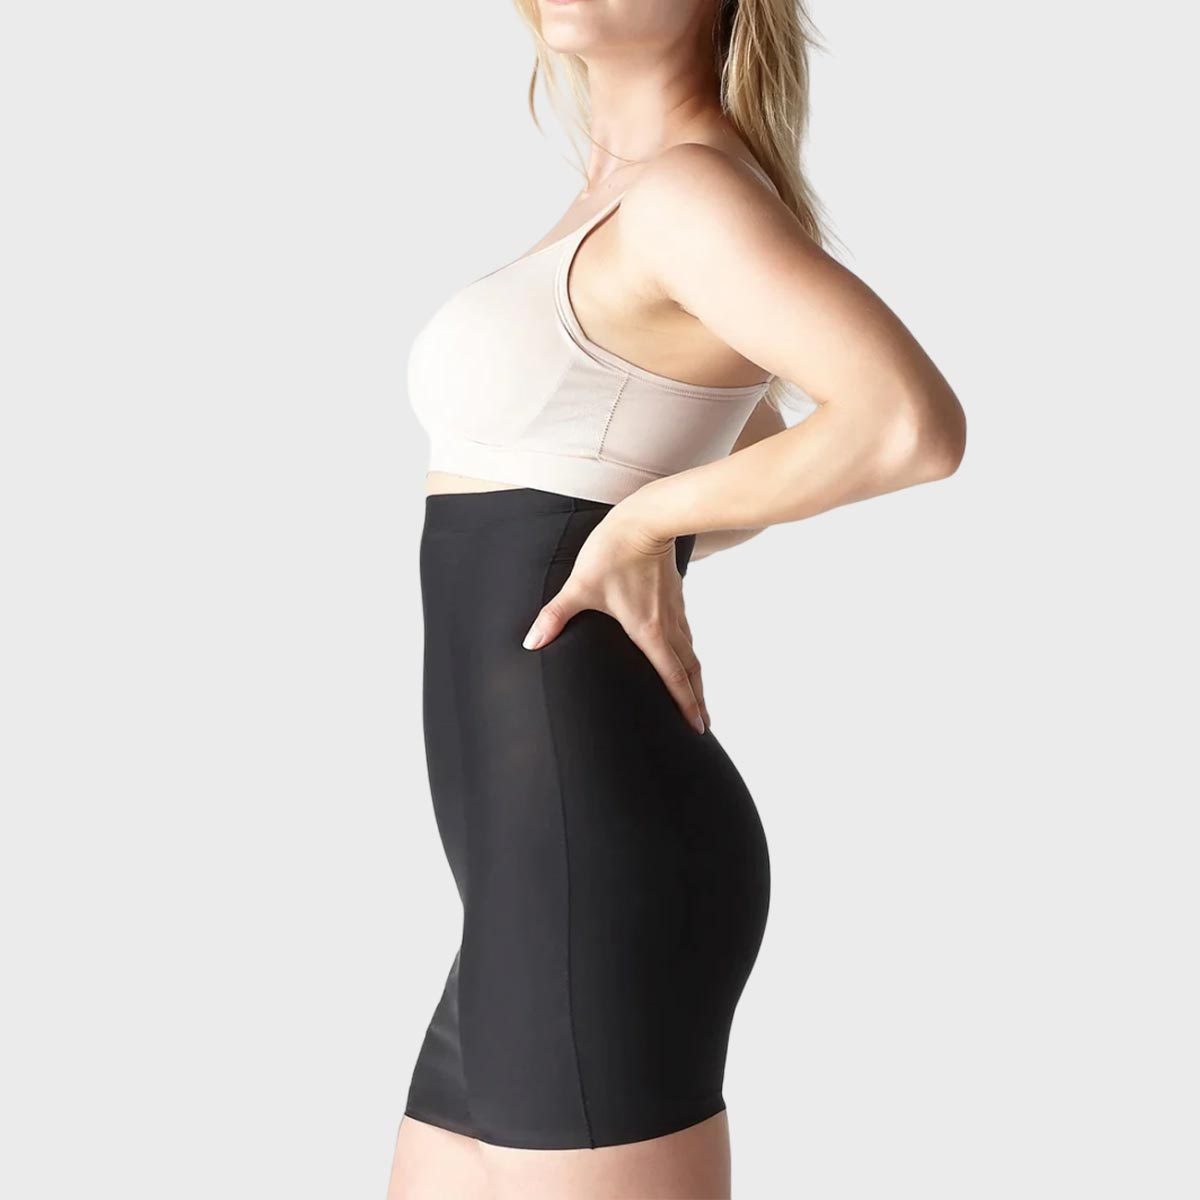 The Ultimate Guide to High Waist Shapewear: Everything You Need to